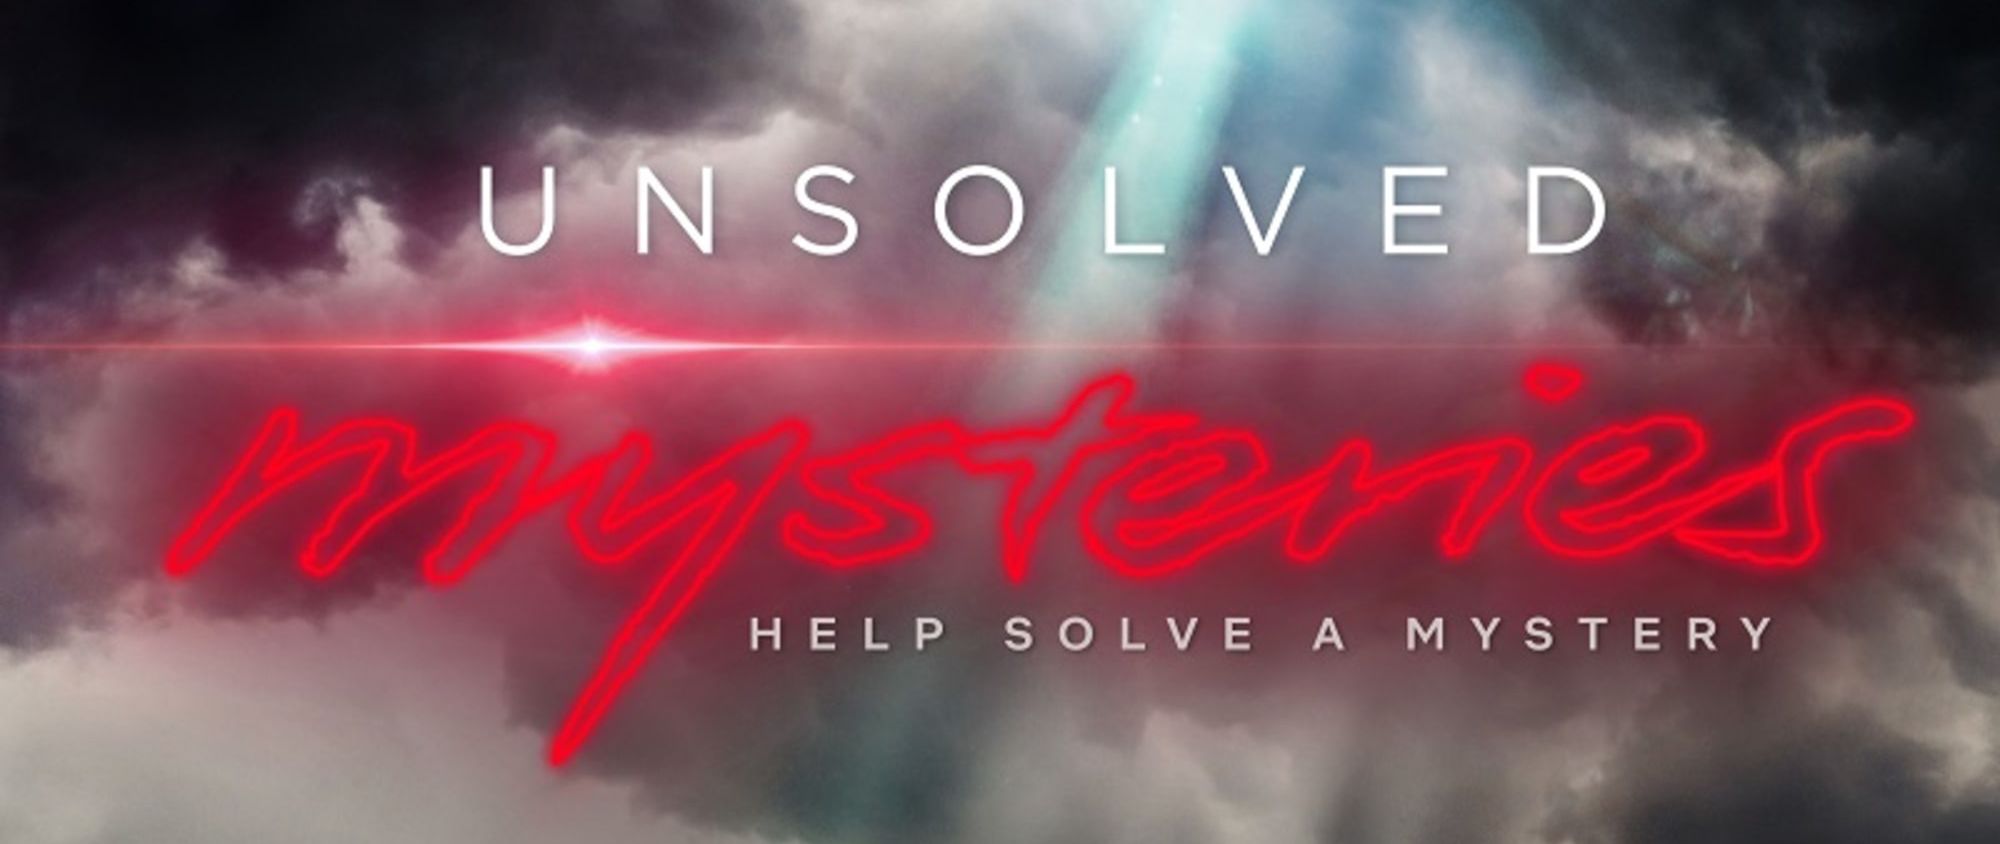 Unsolved Mysteries: Volume 2 - Netflix and Chills